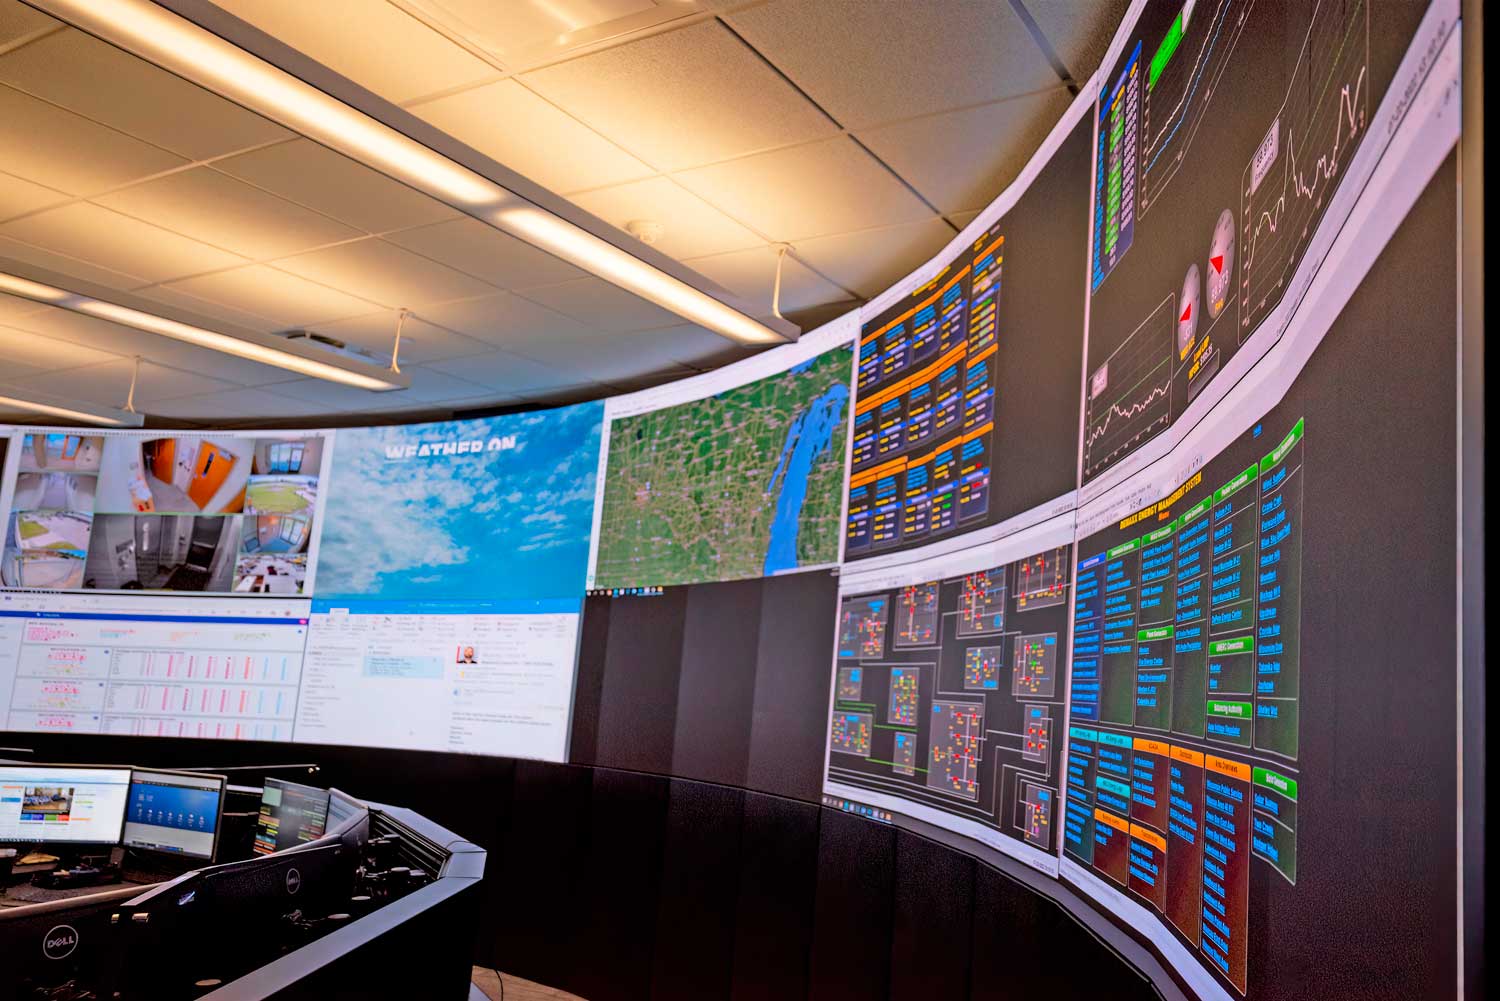 Thumbnail - System operators use a curved videowall driven by an Extron Quantum Ultra processor to monitor and manage the public power grid for the state and its service territories.